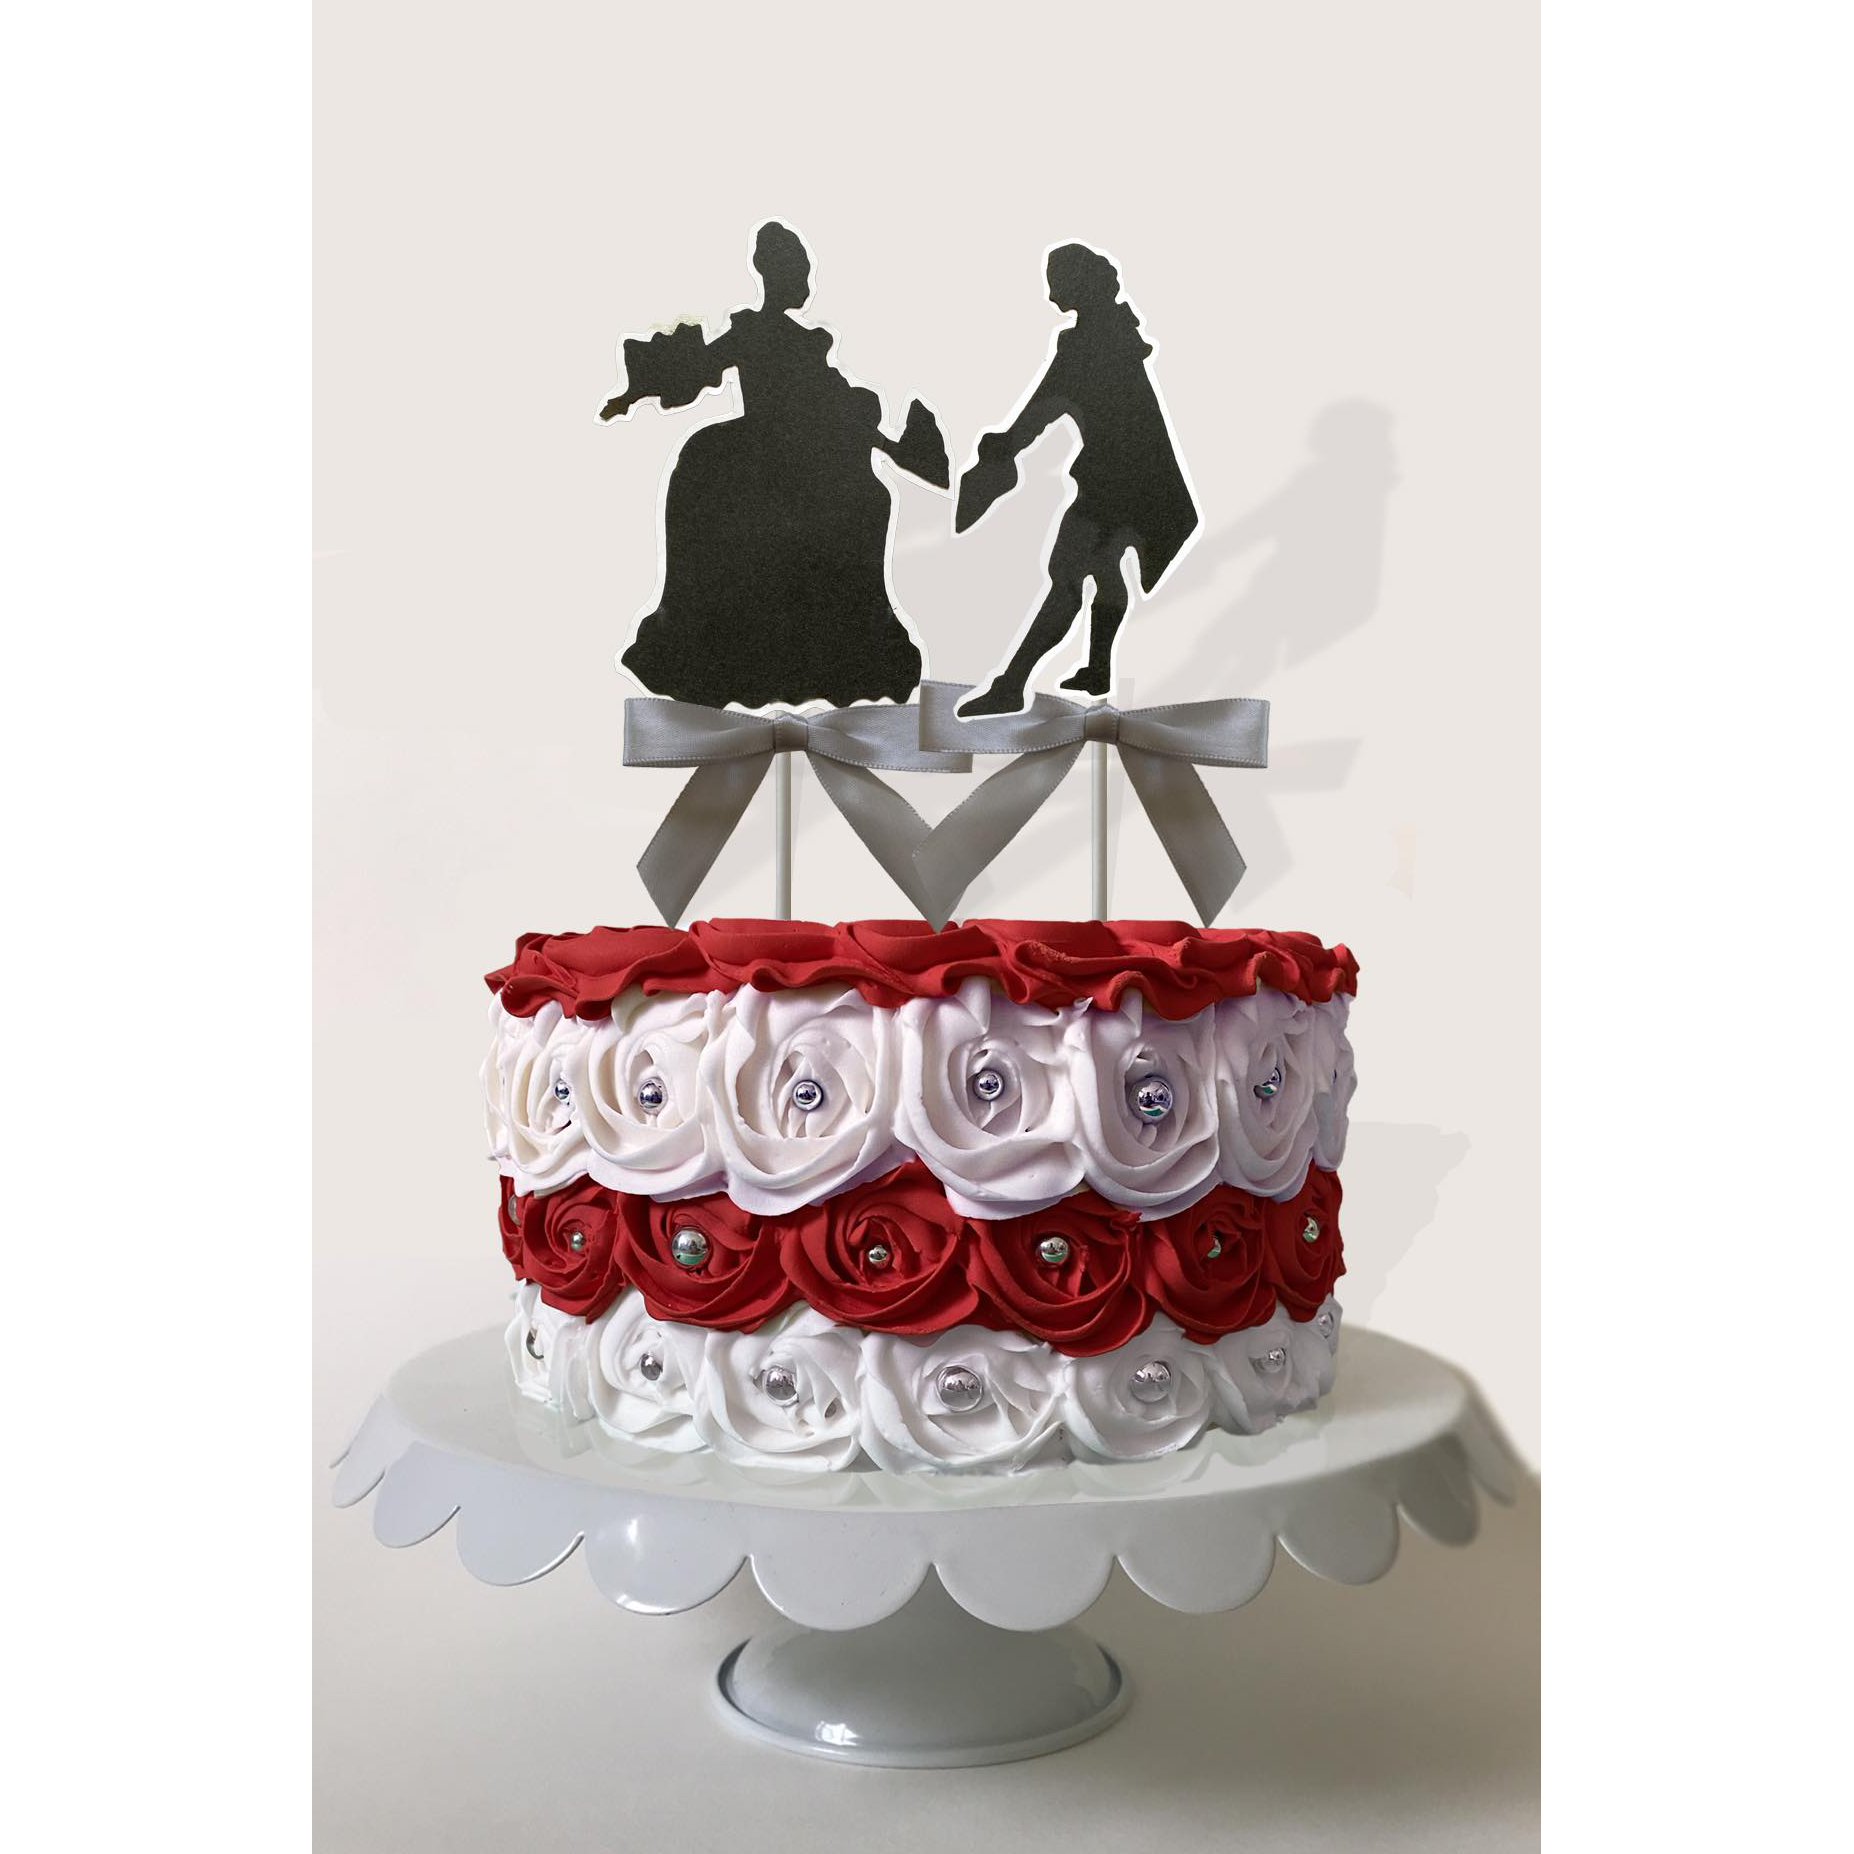 green silhouette cake toppers of a girl